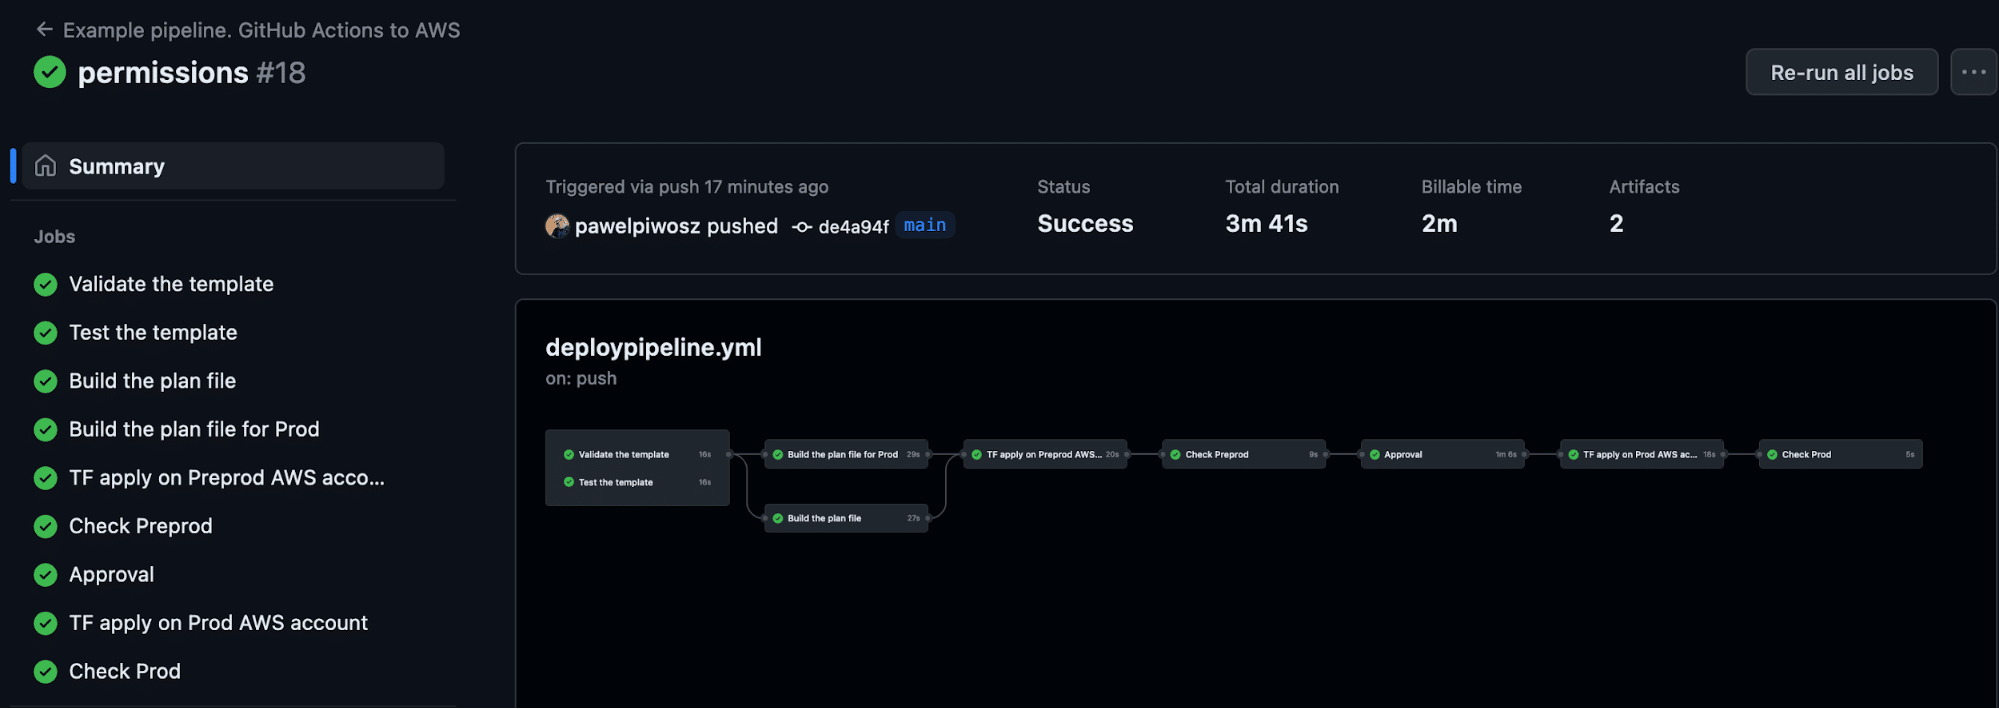 github actions pipelines